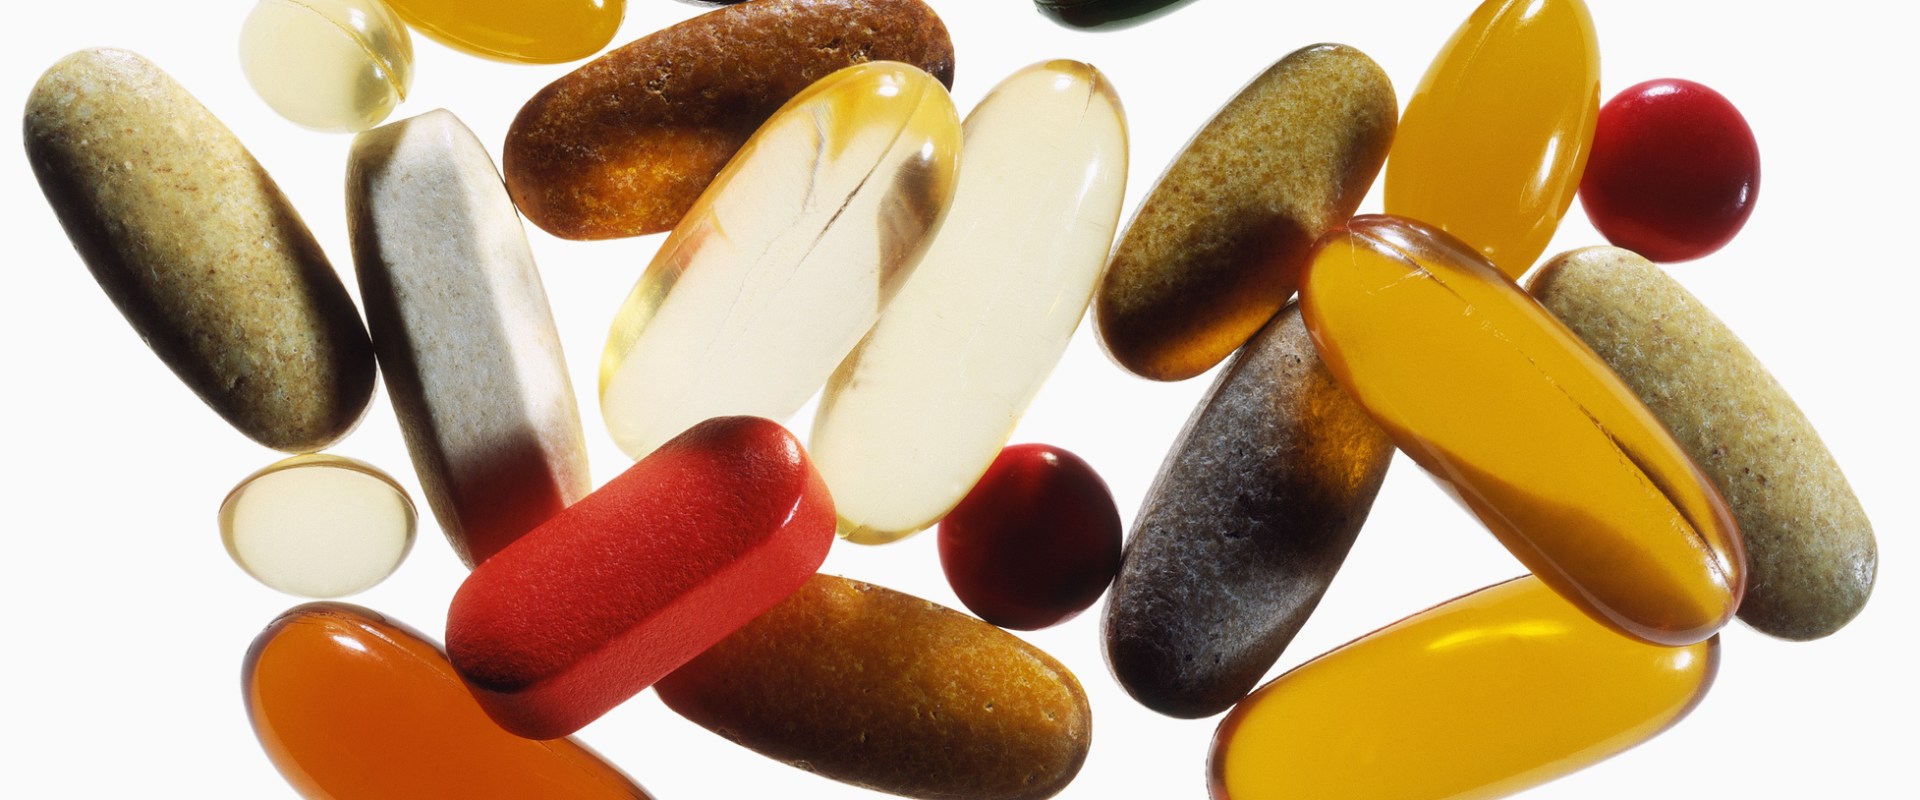 Are Natural Dietary Supplements Safe? - An Expert's Perspective